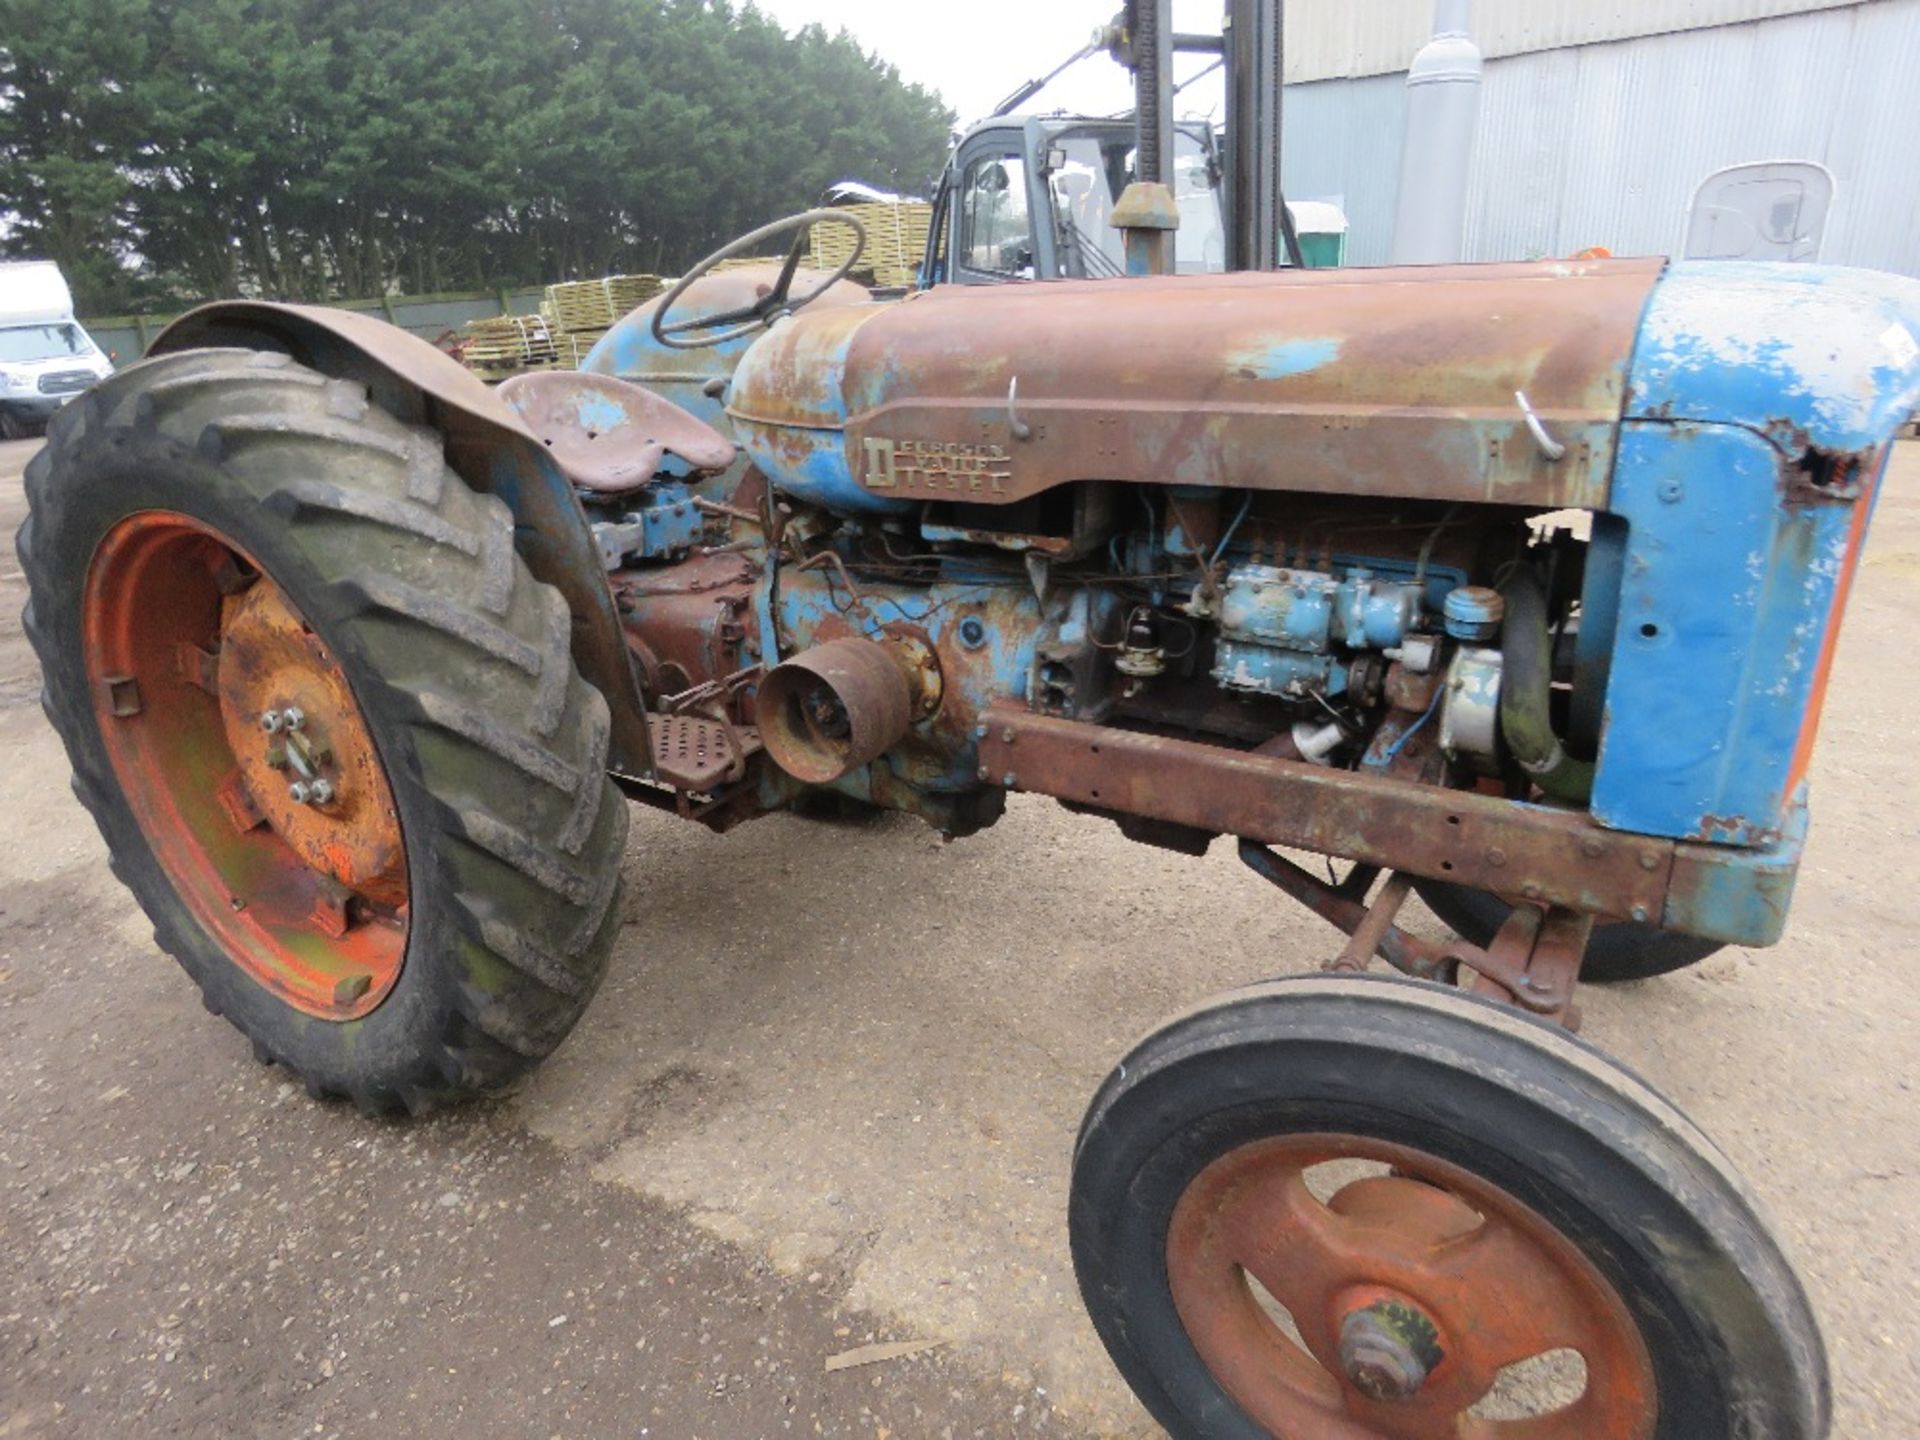 FORDSON MAJOR TRACTOR, ORIGINALLY SUPPLIED BY COUNTY GARAGE CO LTD FROM CARLISLE. WHEN TESTED WAS S